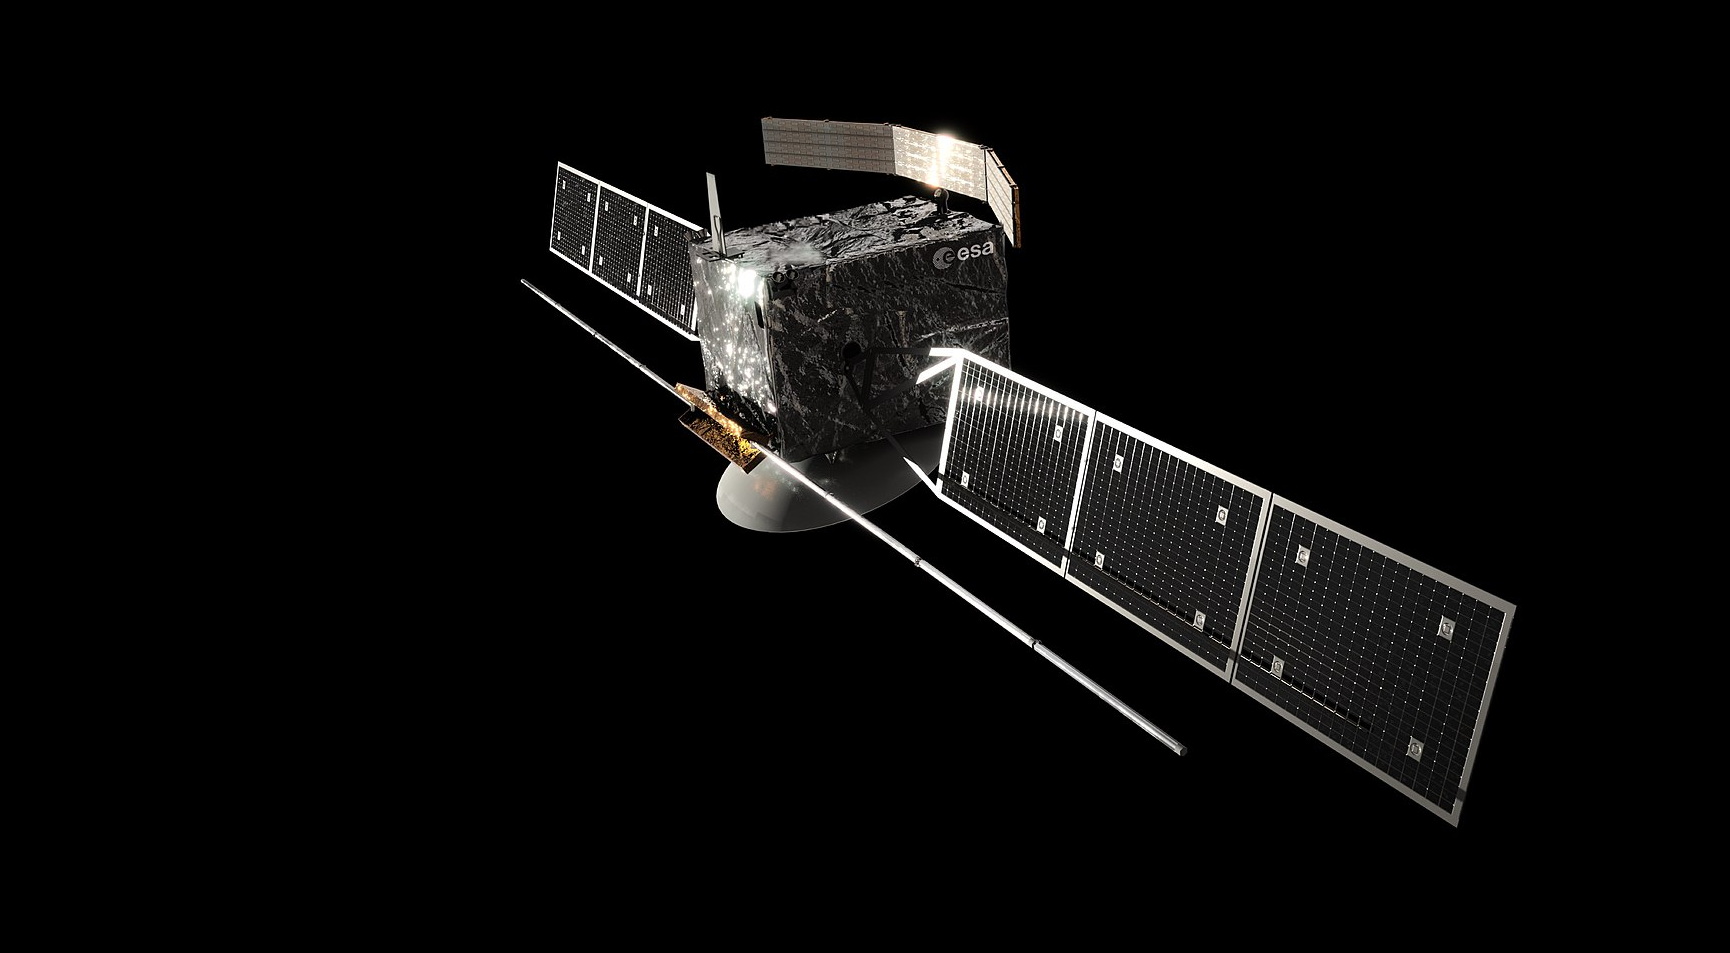 [Figure 1] The Institute for Basic Science (IBS) Planetary Atmospheres Group’s CI officially joins the European Space Agency (ESA) and NASA-led Venus orbiter mission EnVision as a Co-Investigator.
        [Image Source: ESA/NASA/Paris Observatory/VR2Planets]